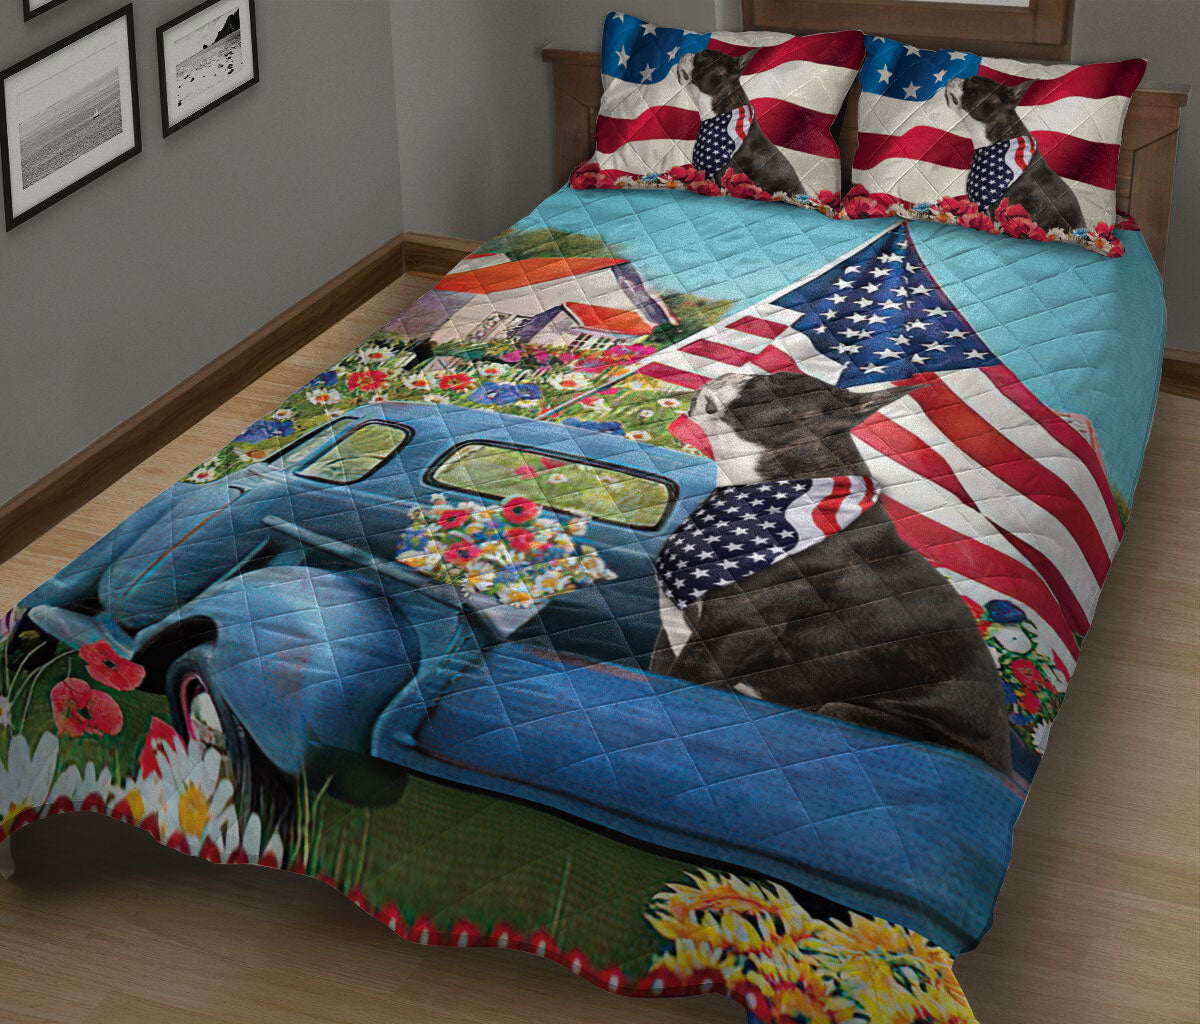 Ohaprints-Quilt-Bed-Set-Pillowcase-Boston-Terrier-In-Car-Patriotic-Dog-America-Us-Flag-Flower-Spring-Country-Road-Blanket-Bedspread-Bedding-269-King (90'' x 100'')